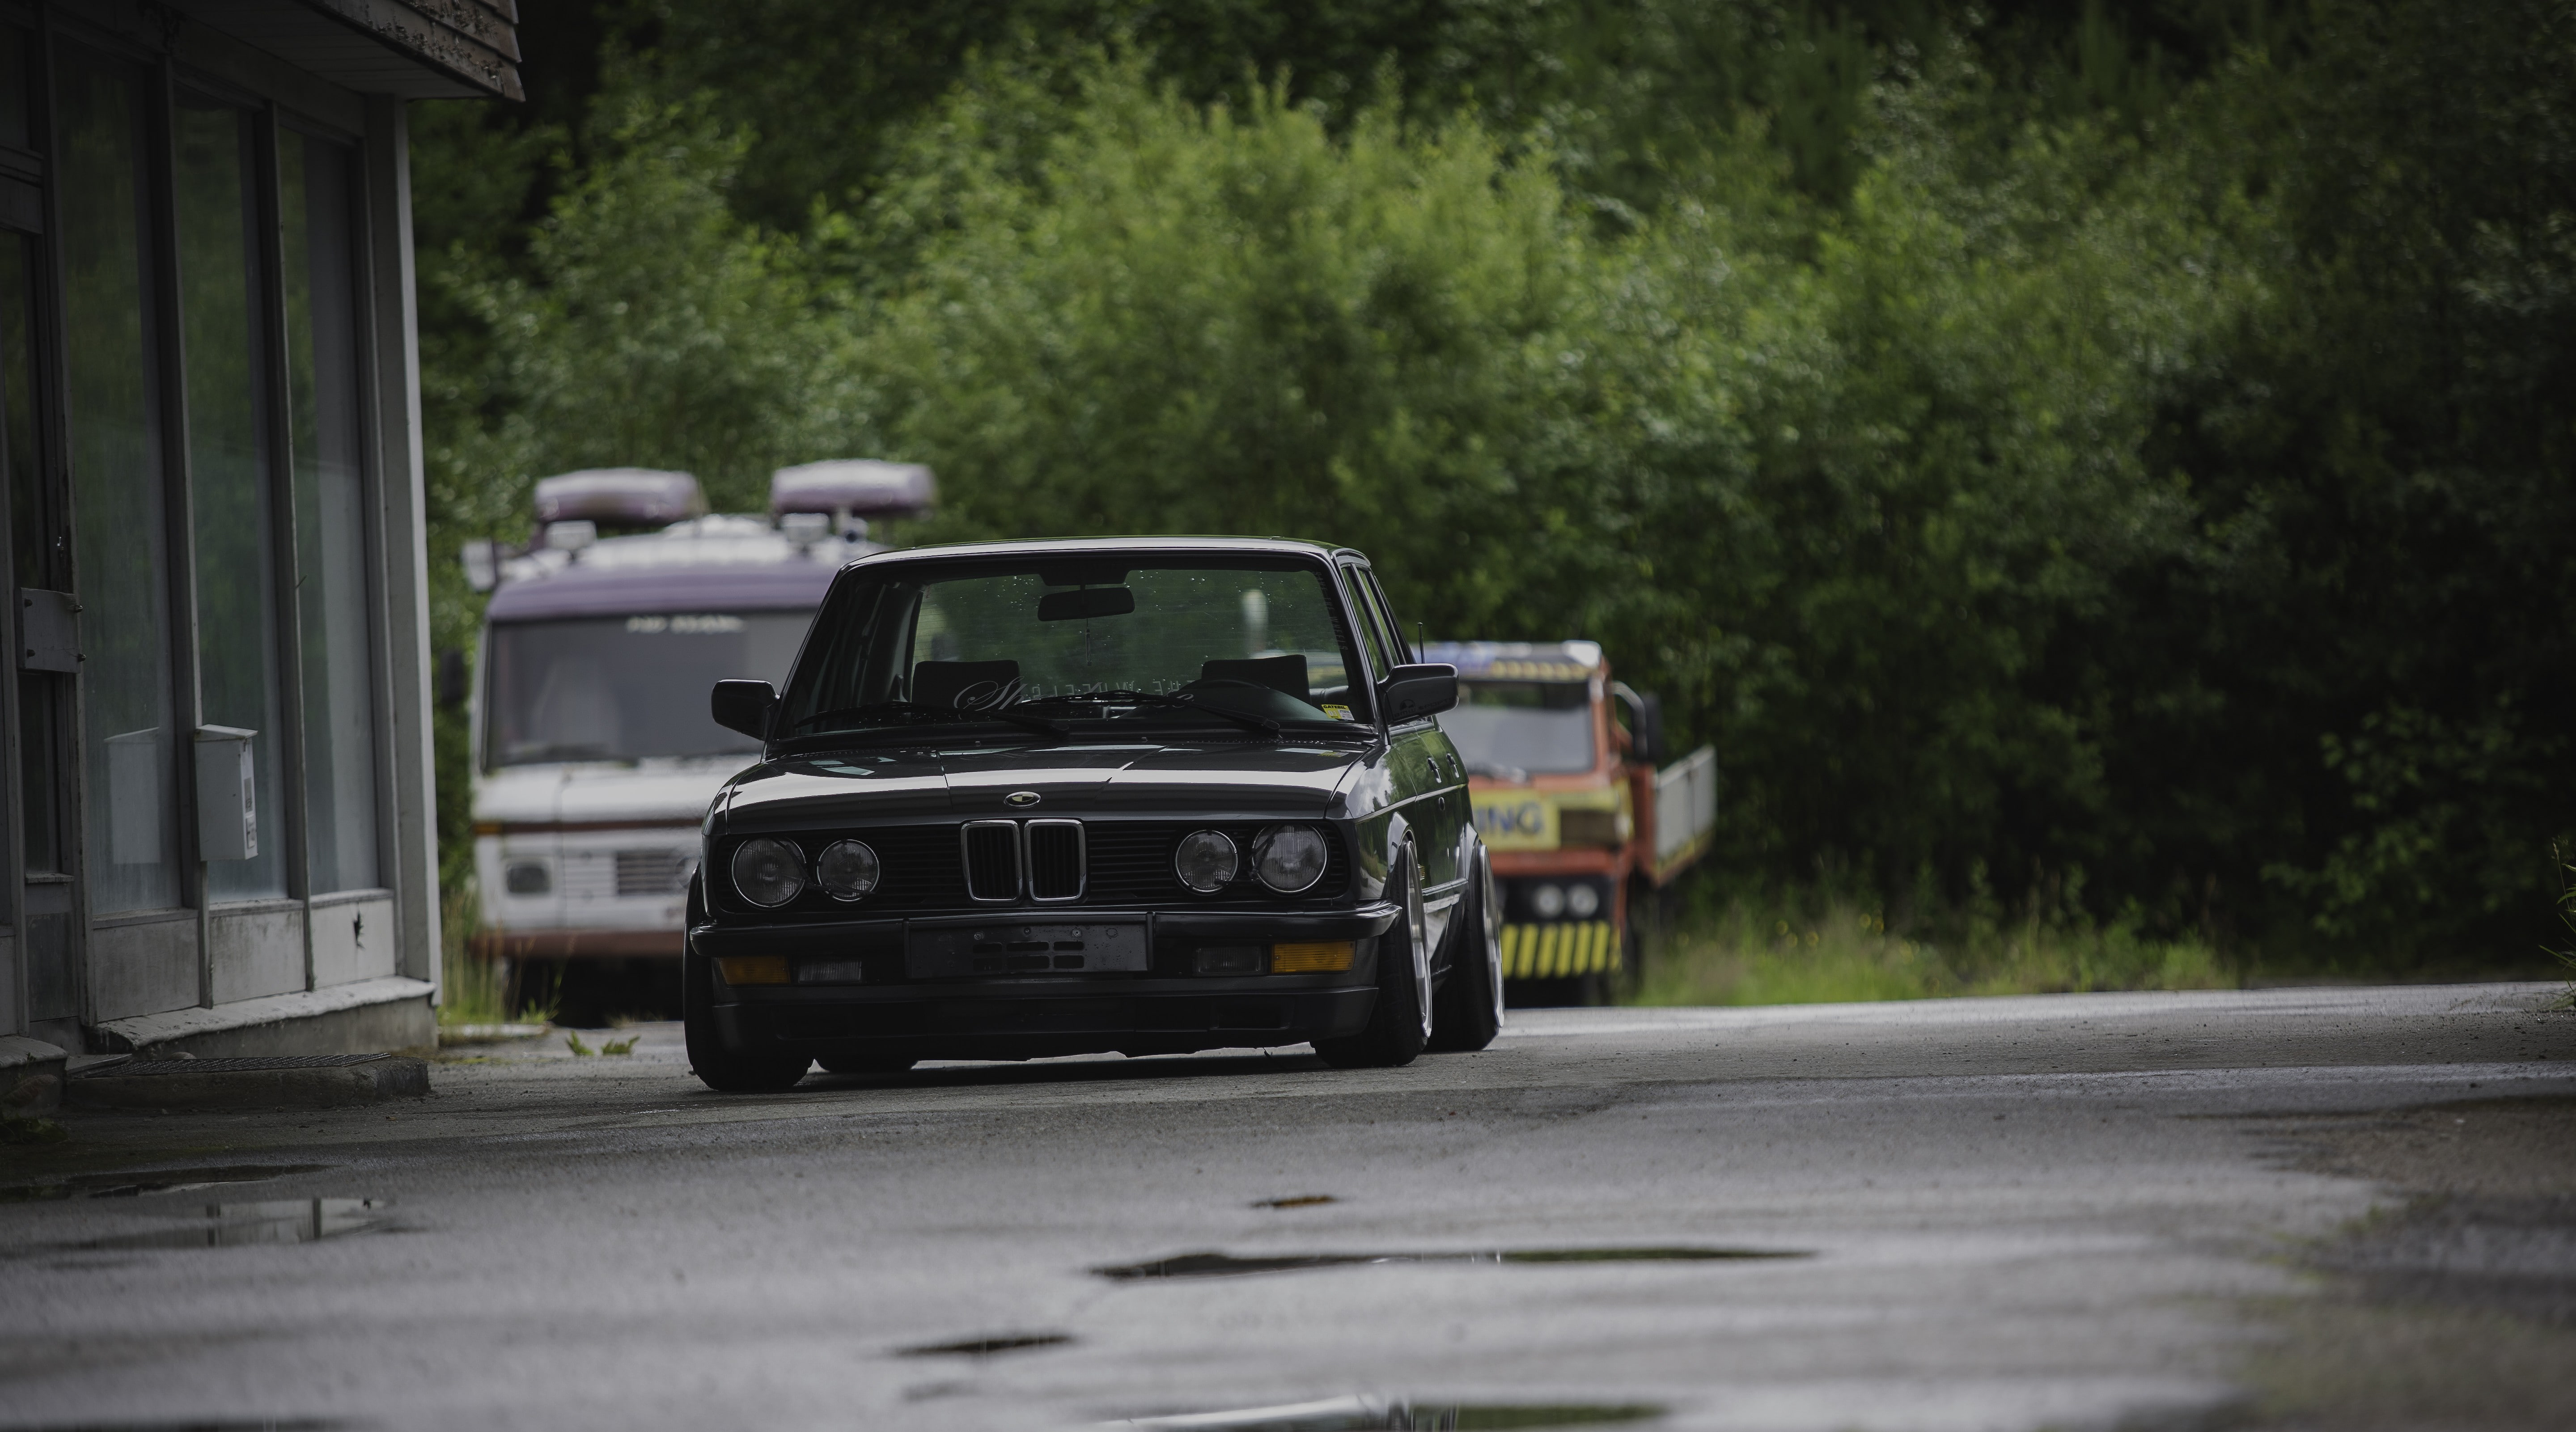 Free Download Hd Wallpaper Bmw E28 Stance Stanceworks Low Norway